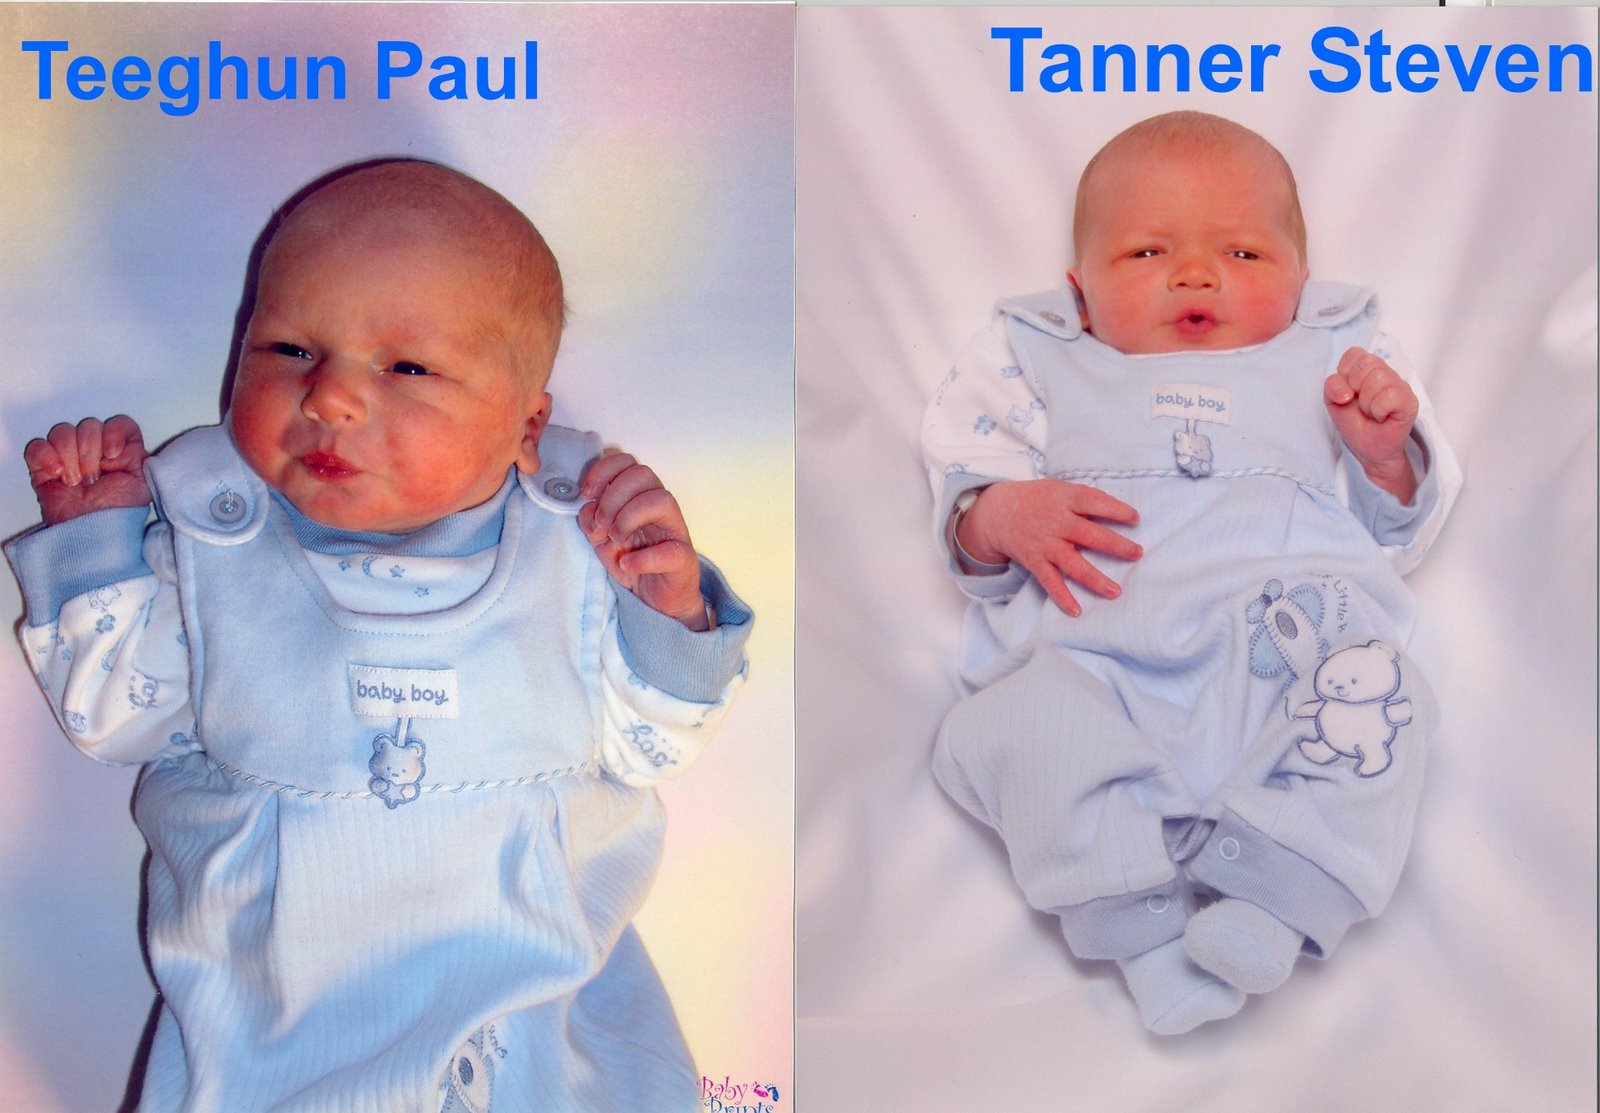 [Tanner+&+Teeghun's+first+hospital+picture.jpg]